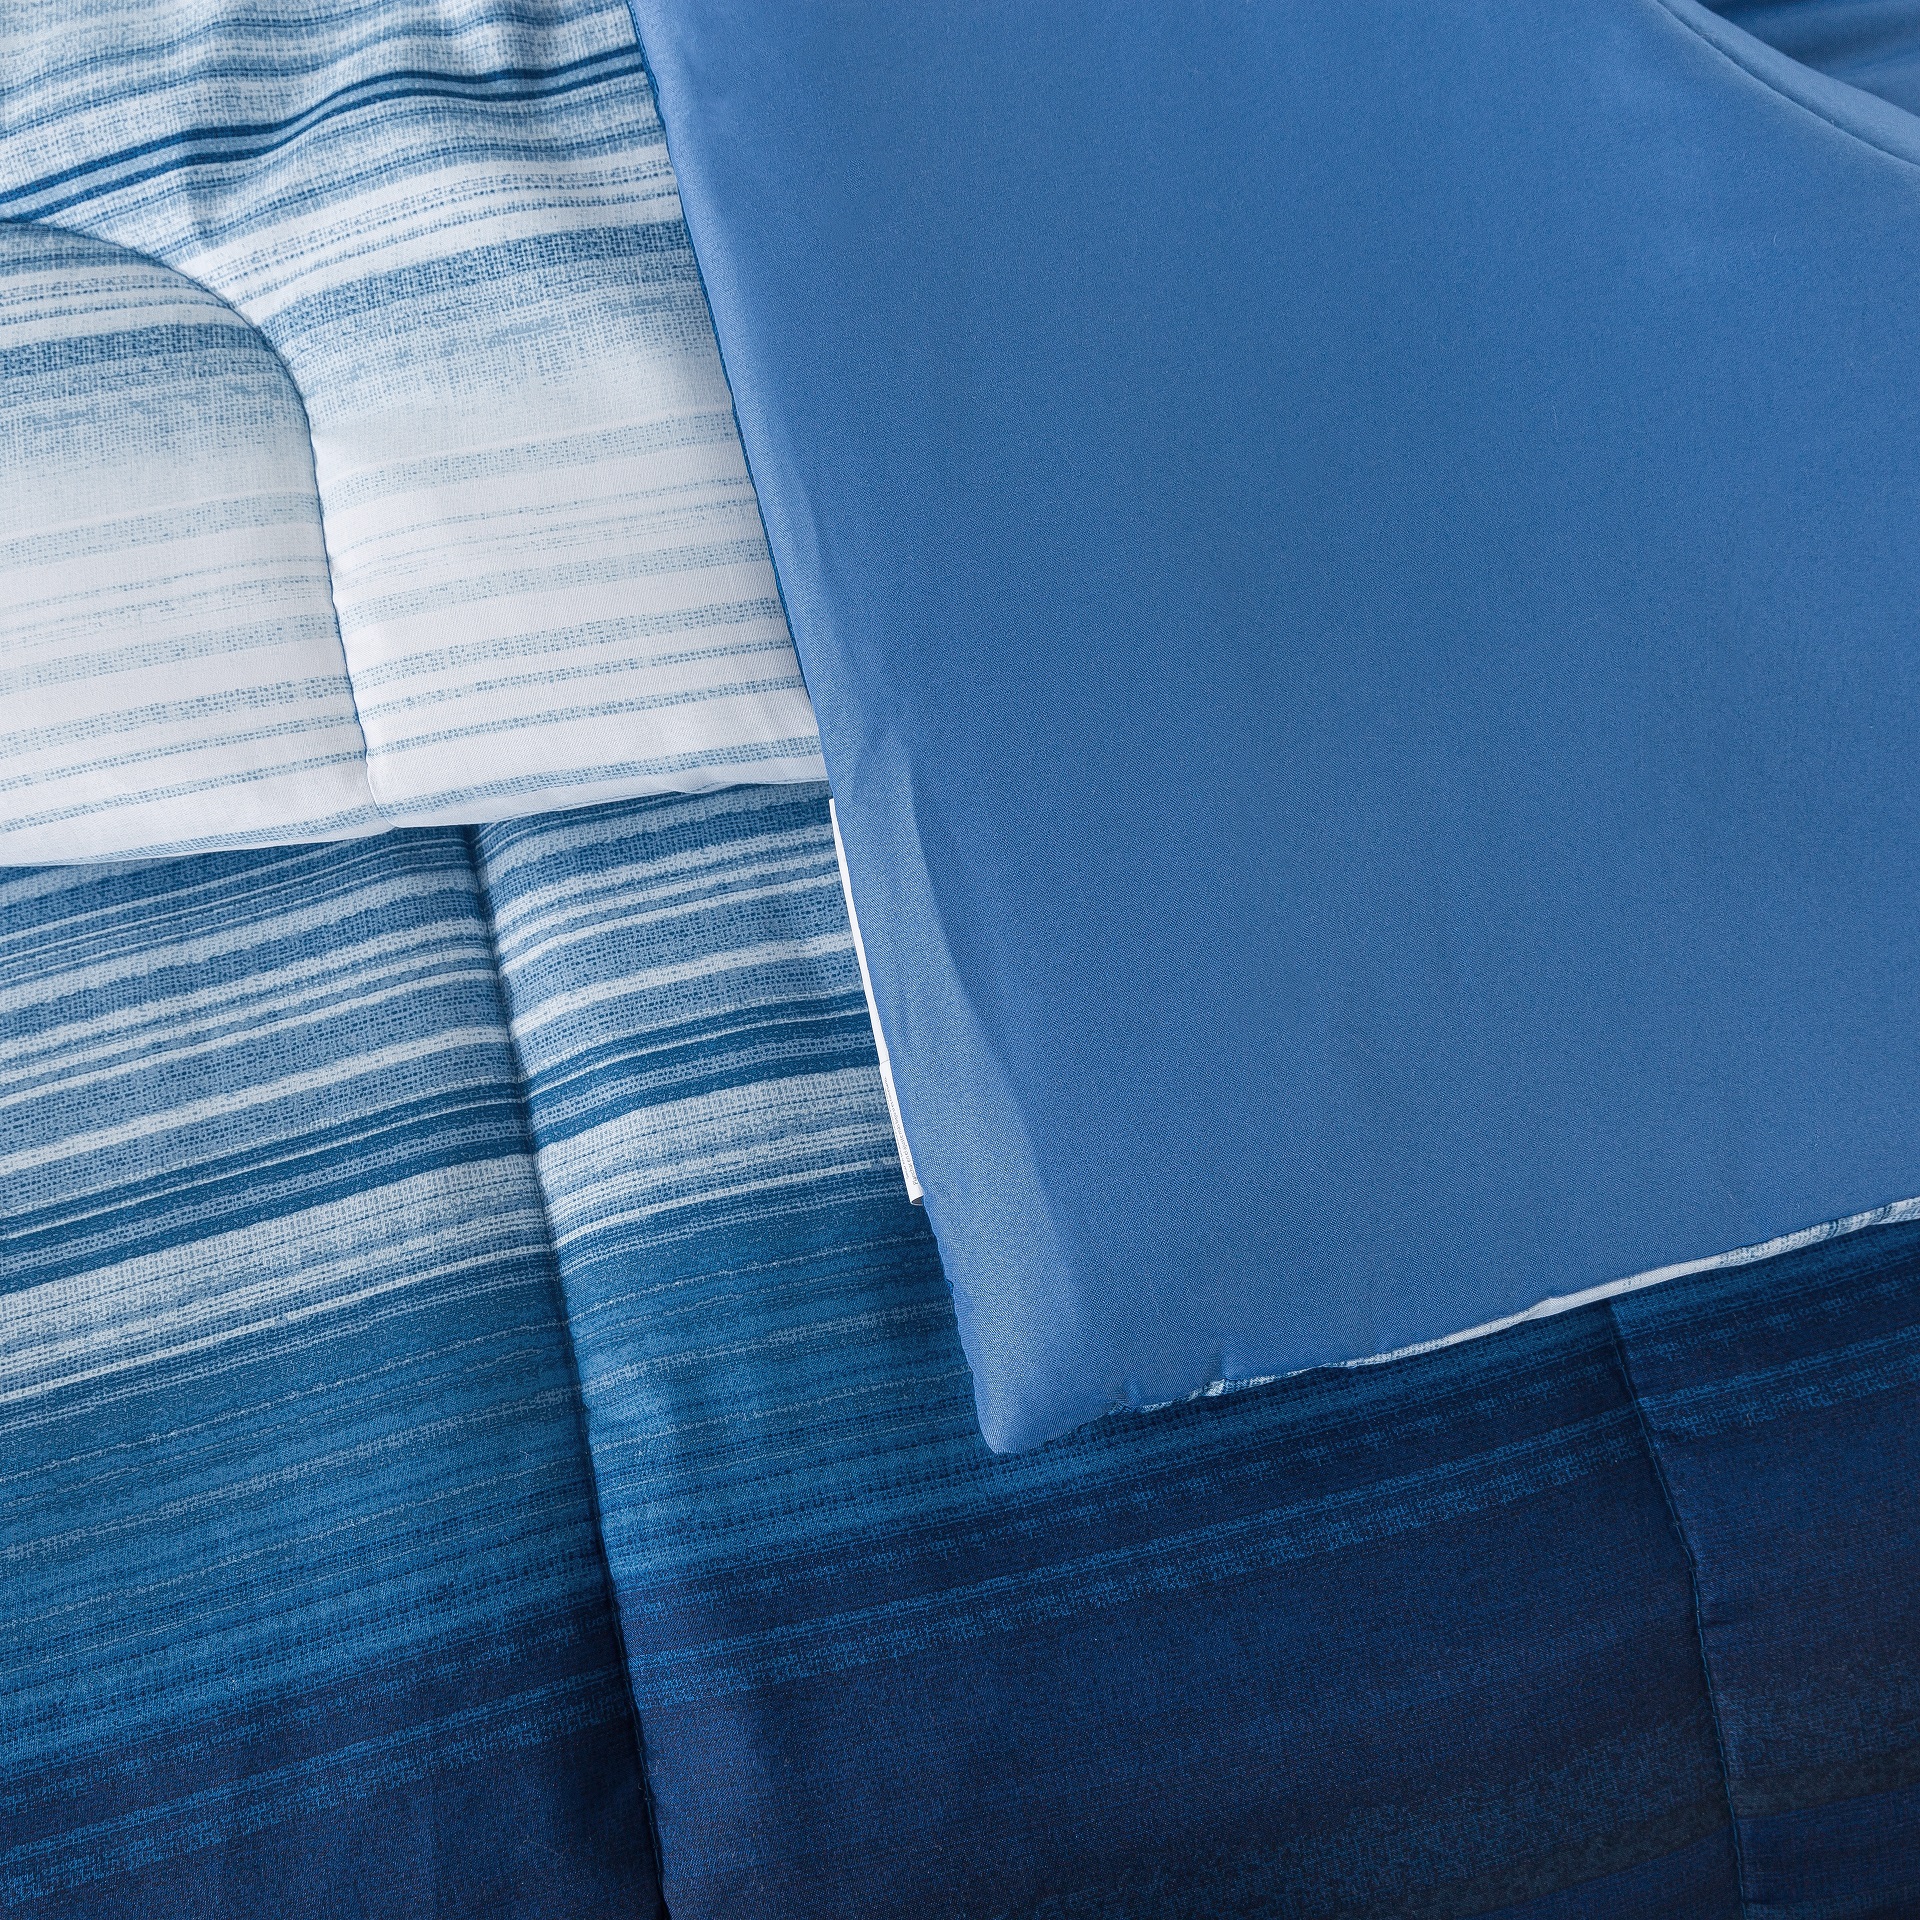 Mainstays Blue Stripe 6 Piece Bed in a Bag Comforter Set With Sheets, Twin/Twin XL - image 3 of 8